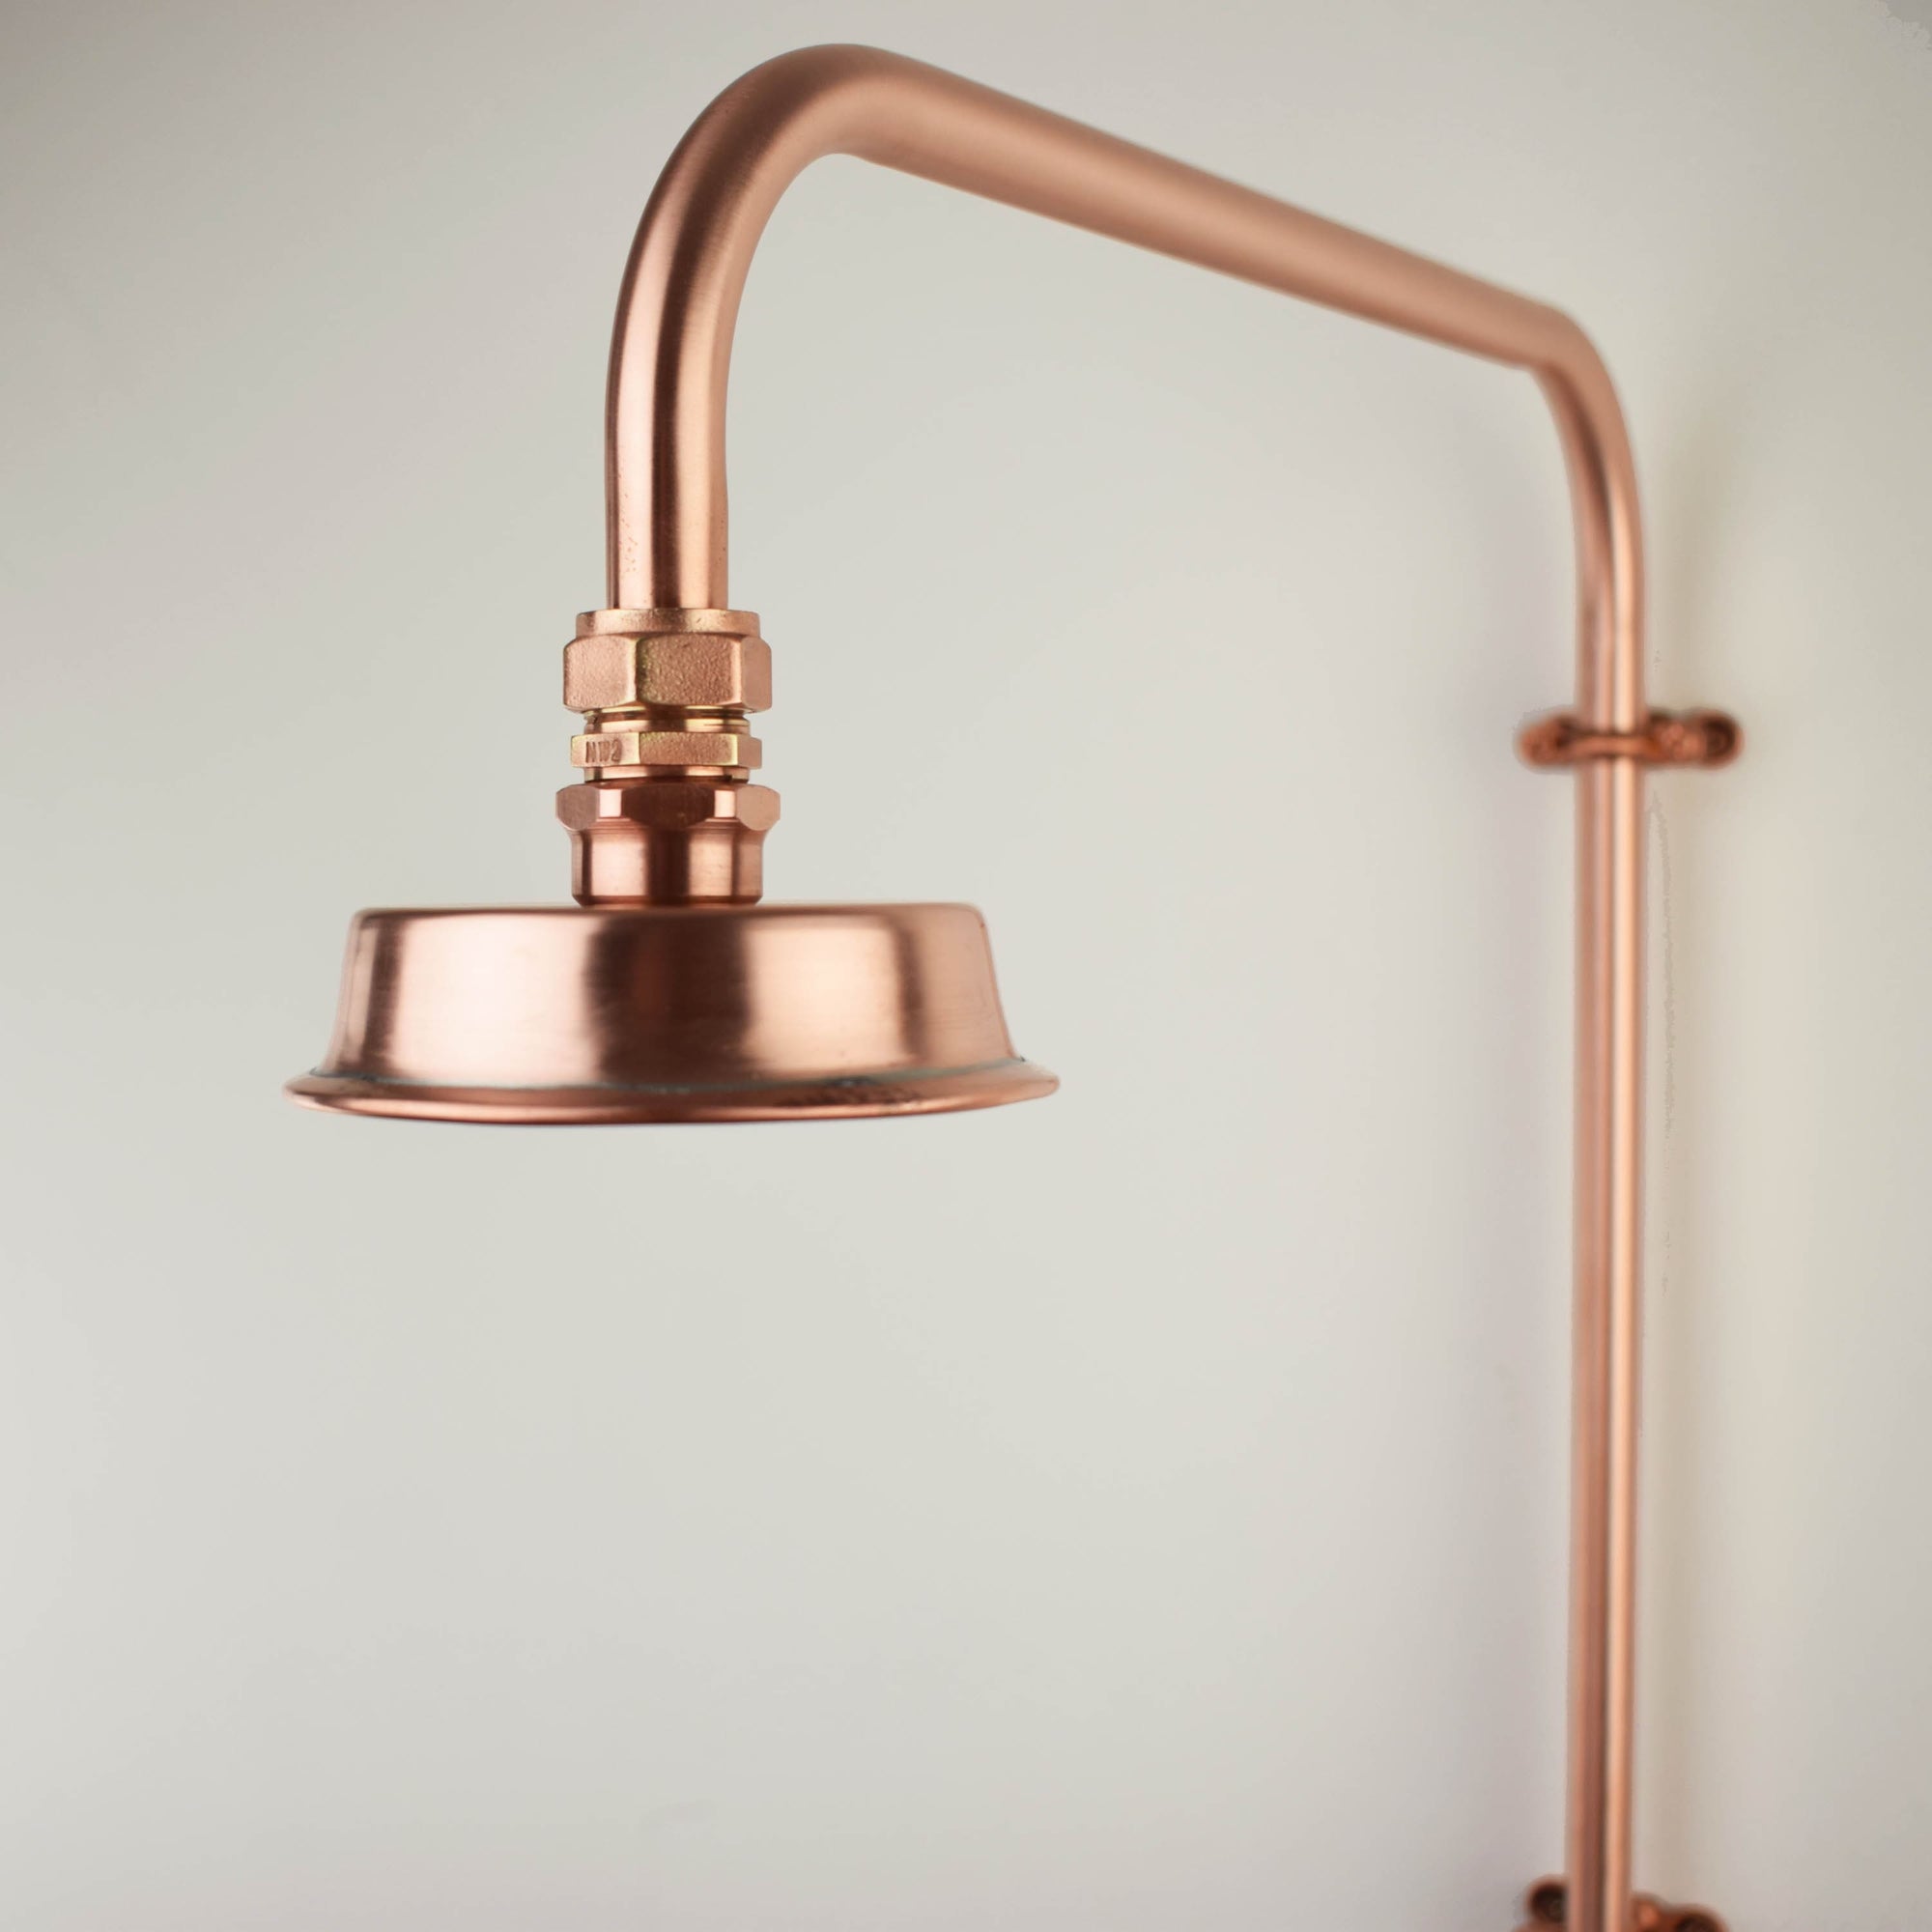 This copper shower head features a sleek and modern design that complements any bathroom aesthetic, while its antimicrobial properties ensure a hygienic shower experience.